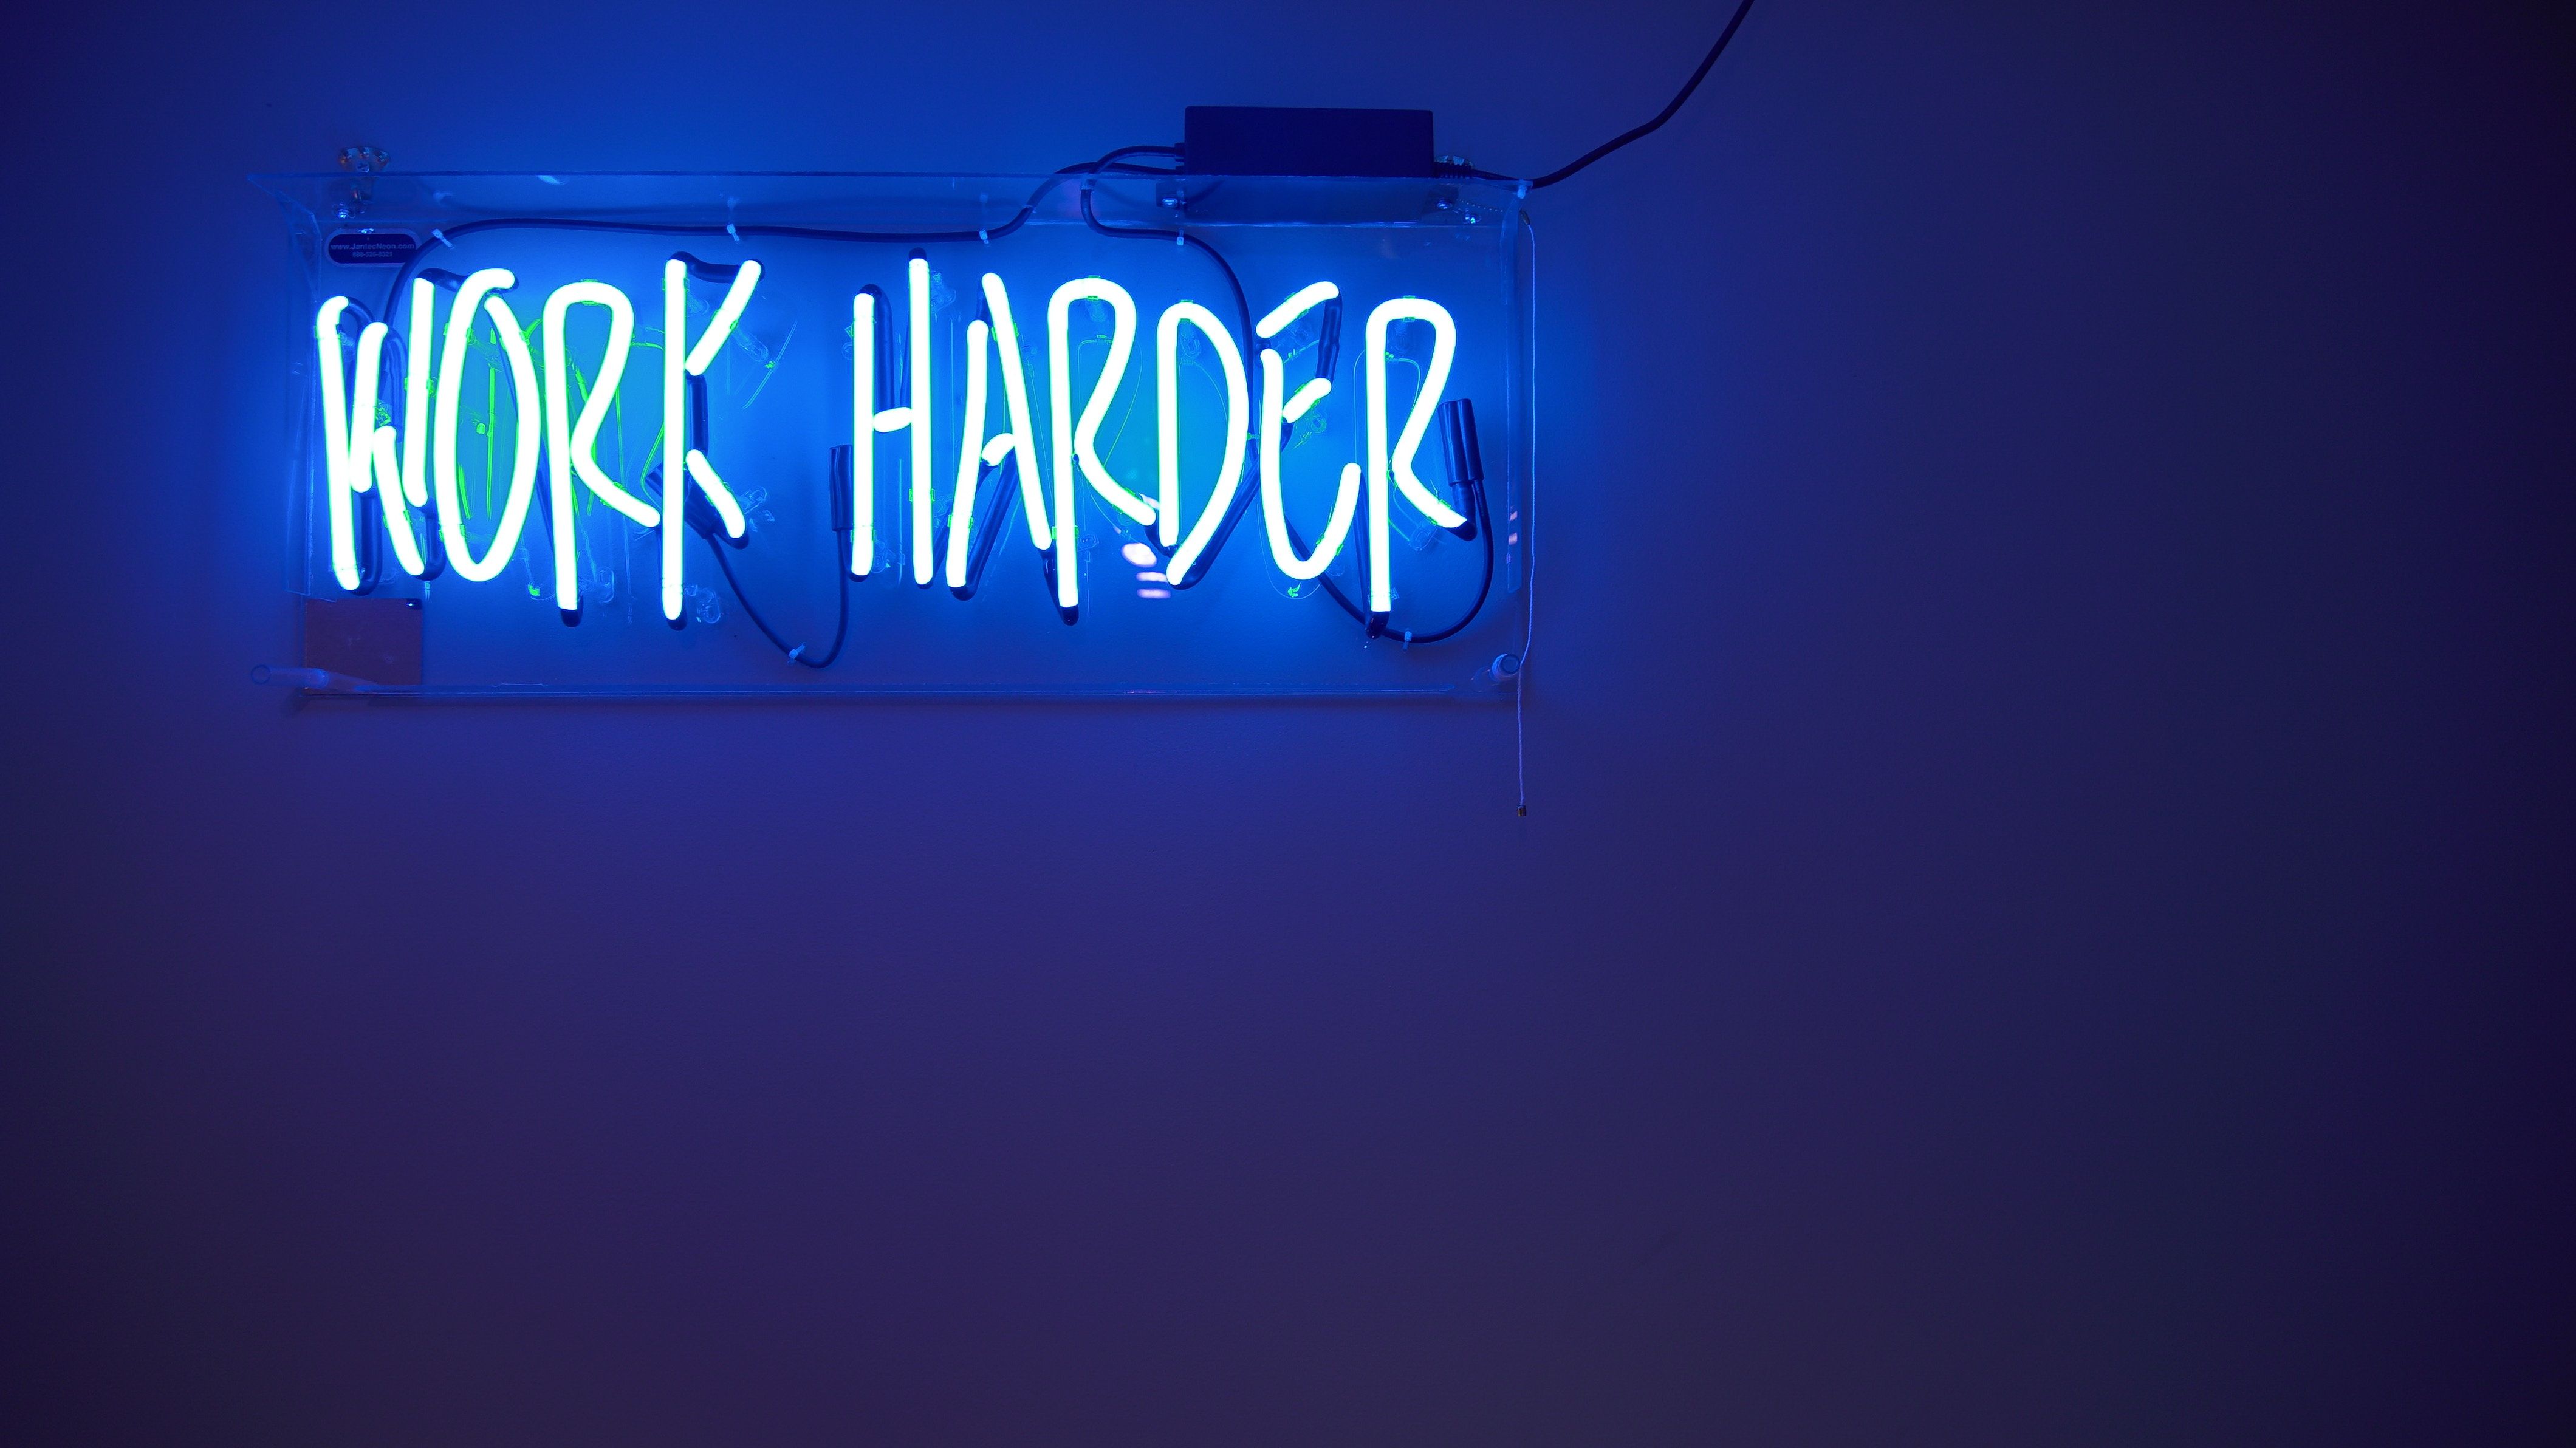 4240x2384 #tumblr, #tumblr background, #hue, #Free picture, #word, #light, #work harder, #blue, #tumblr wallpaper, #sign, #wall, #glow, #work harder sign, #harder, #wallpaper, #work, #neon, #background tumblr, #tumblr background, #neon sign